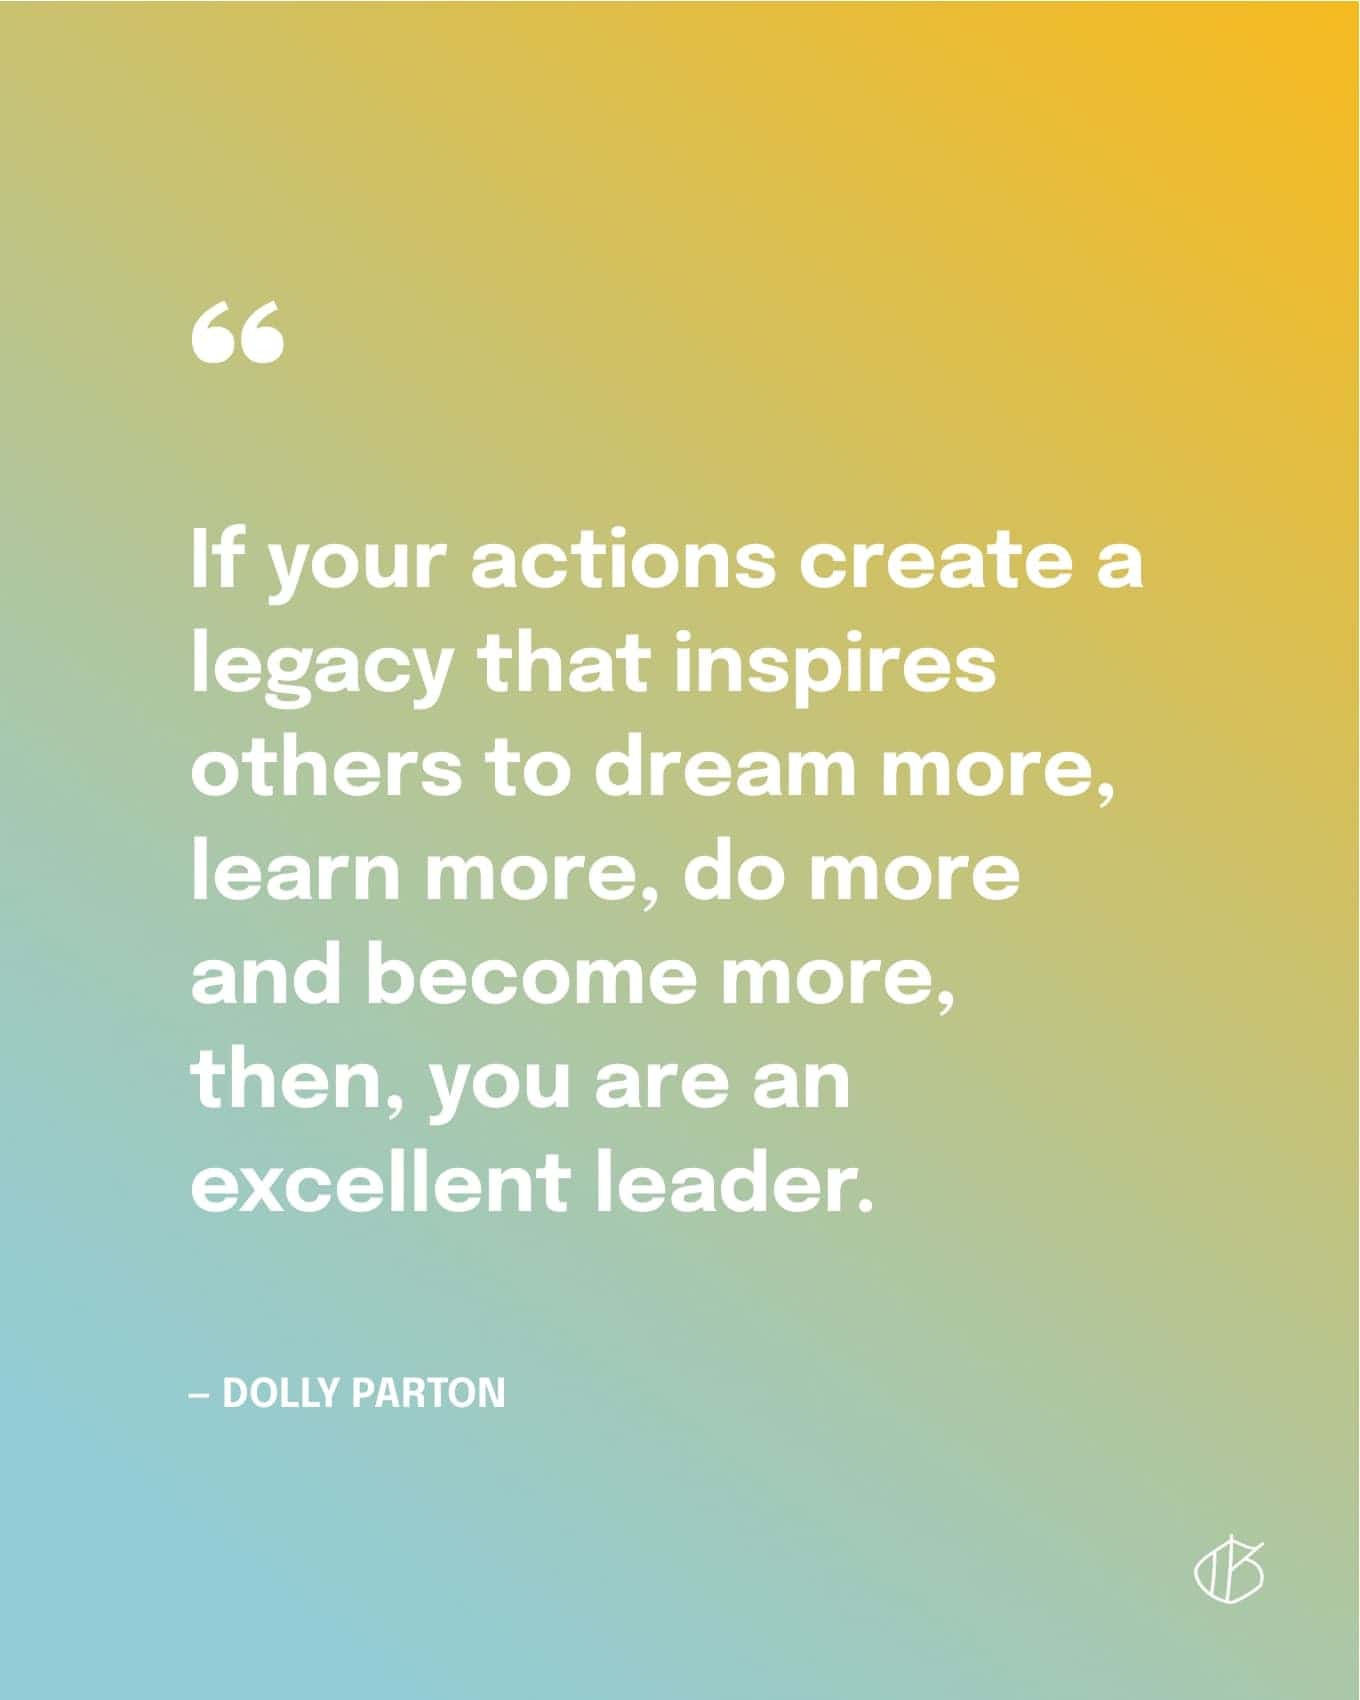 Dolly Parton Quote Wallpaper: If your actions create a legacy that inspires others to dream more, learn more, do more and become more, then, you are an excellent leader.